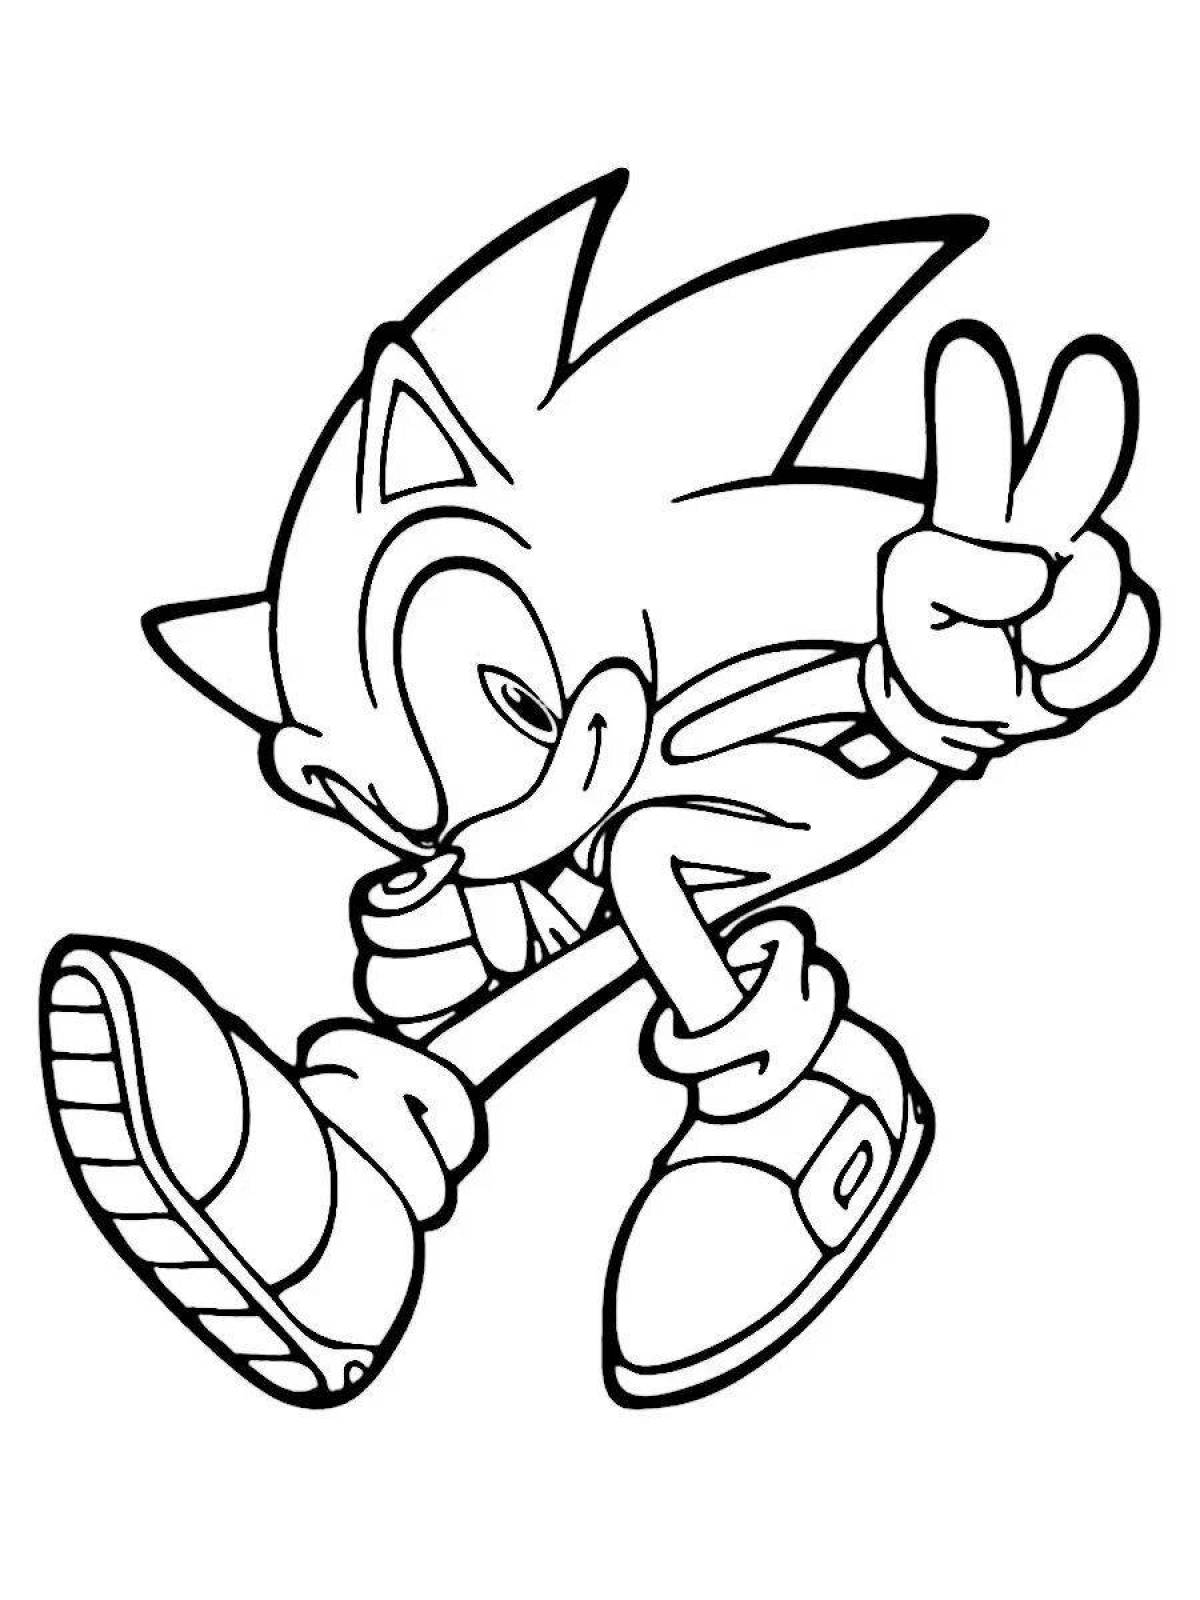 Fearless xs sonic coloring page